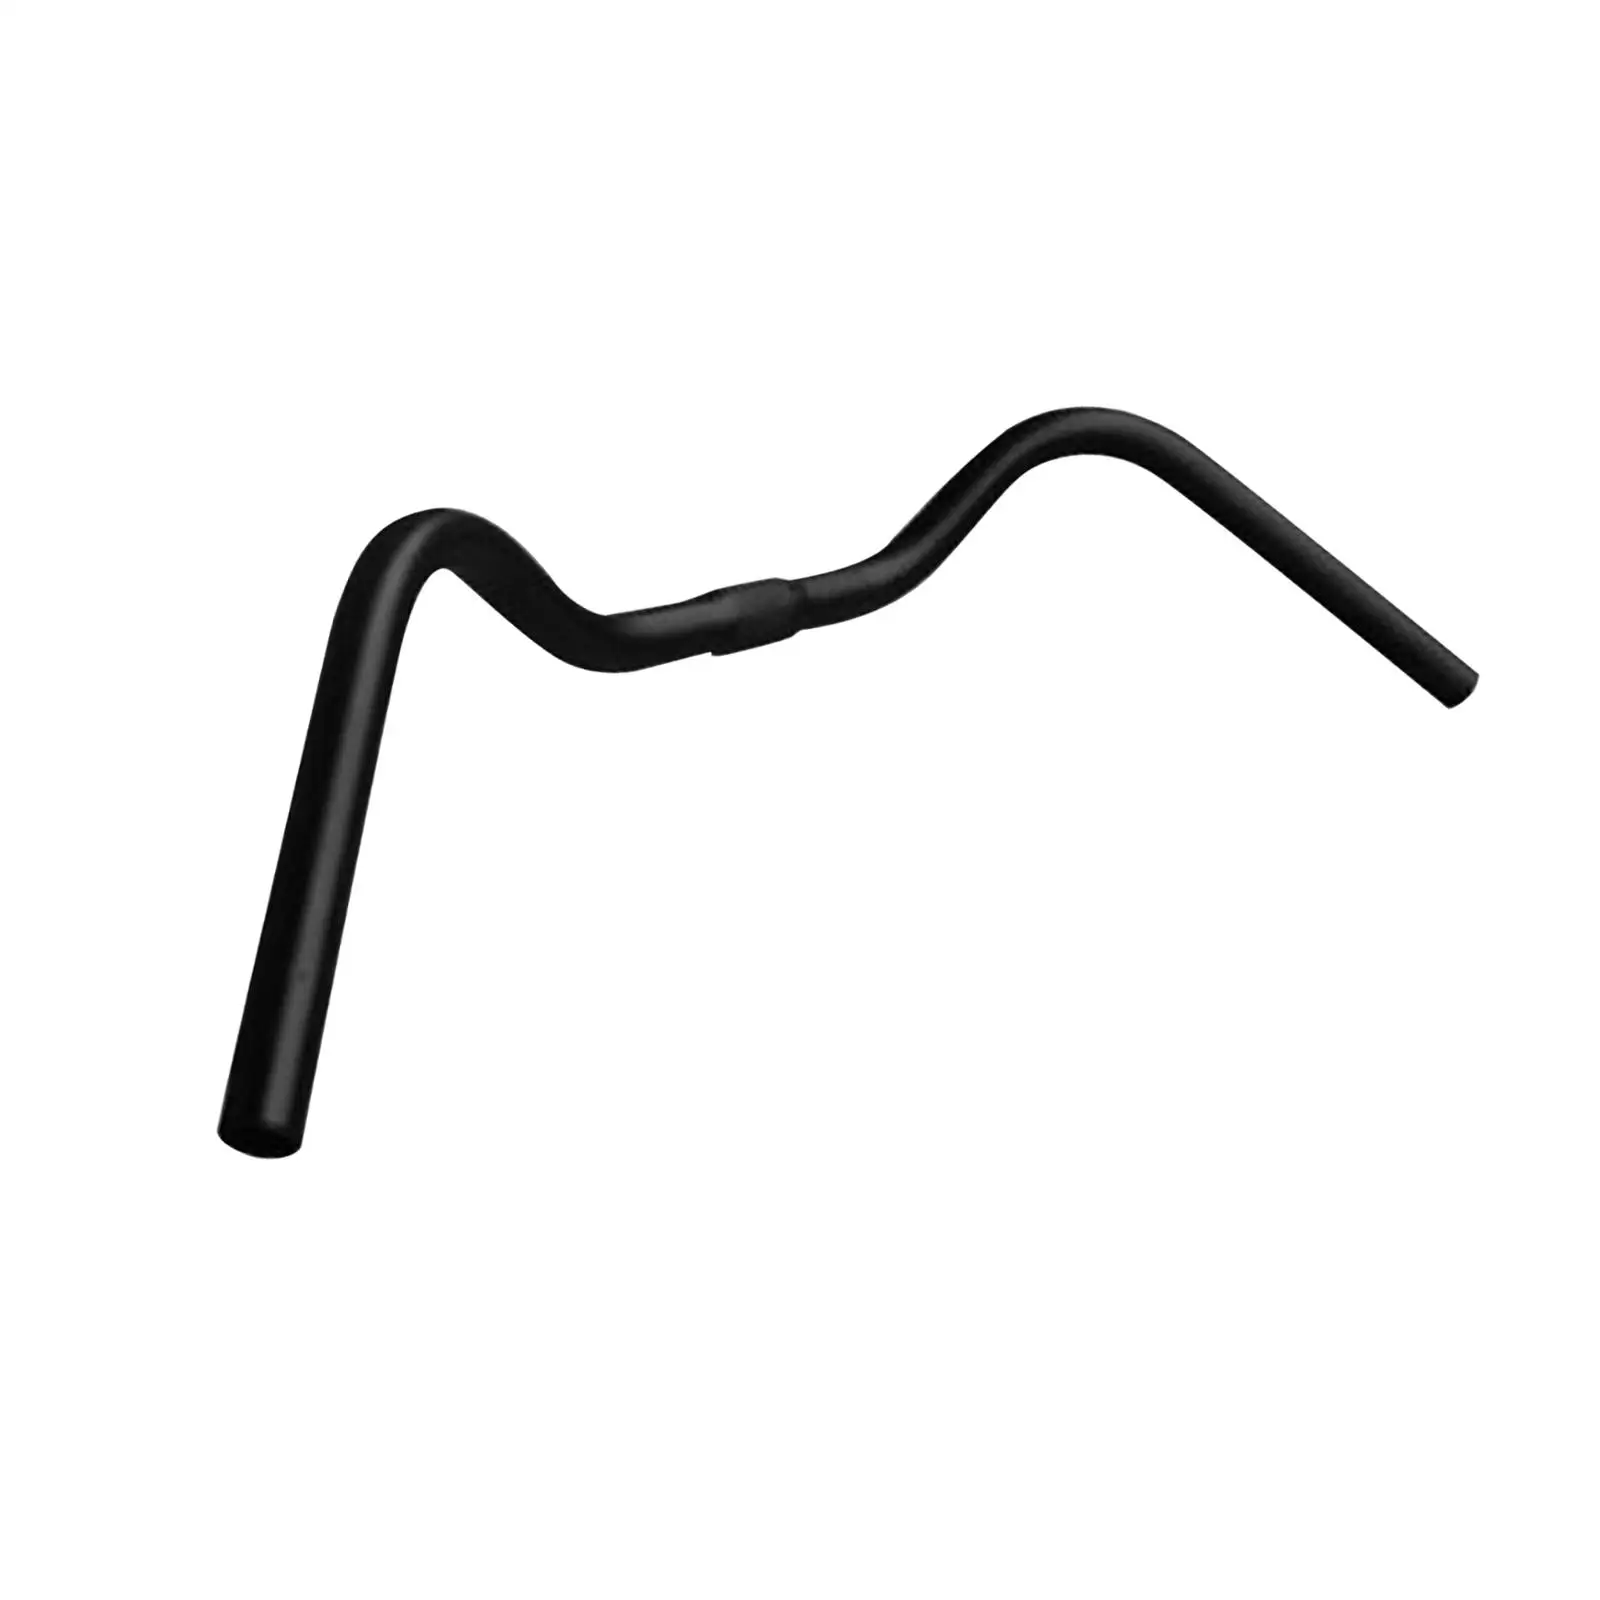 Bike Handlebar Fits 25.4mm Stems Ultralight 560mm Length Sturdy Bicycle Handlebars for Road Bikes Riding Replacement Accessories